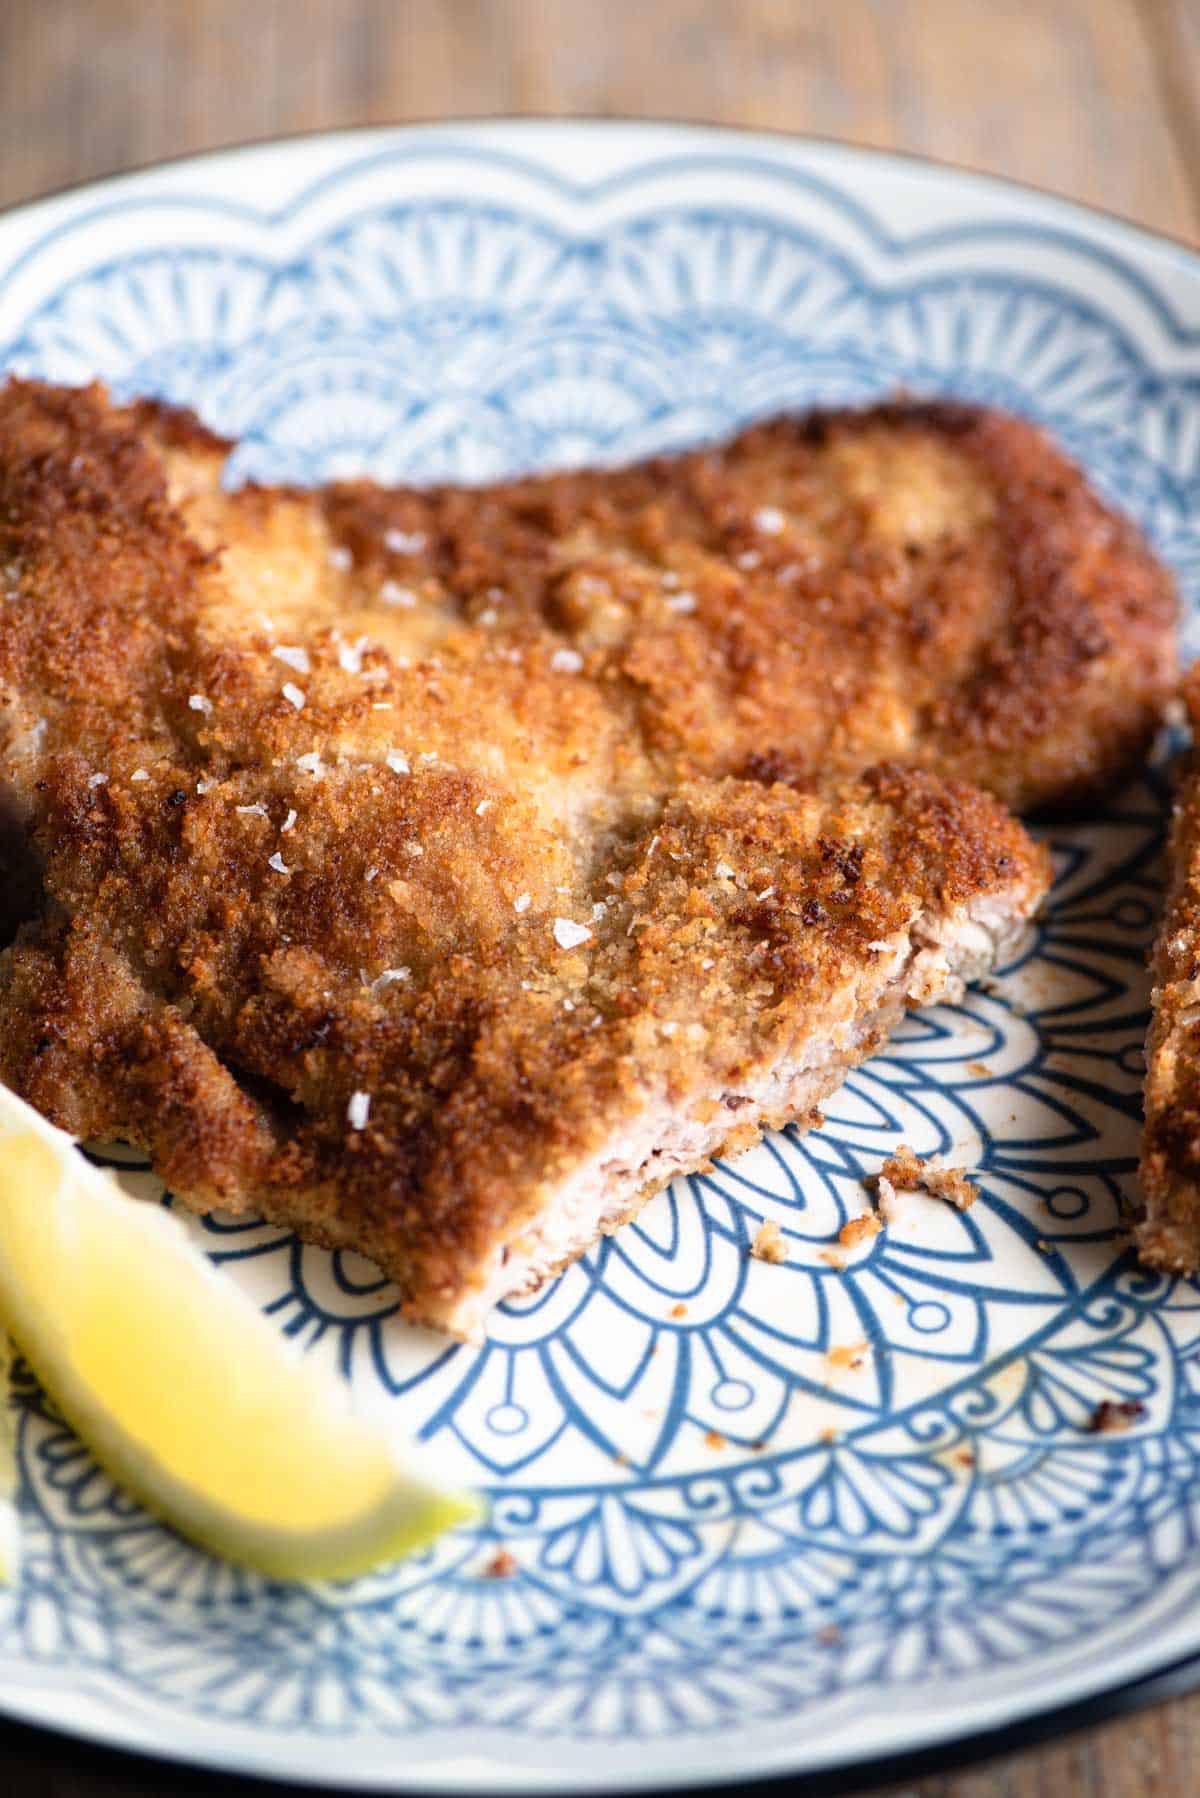 A close up of Veal Milanese on a plate with a slice cut.